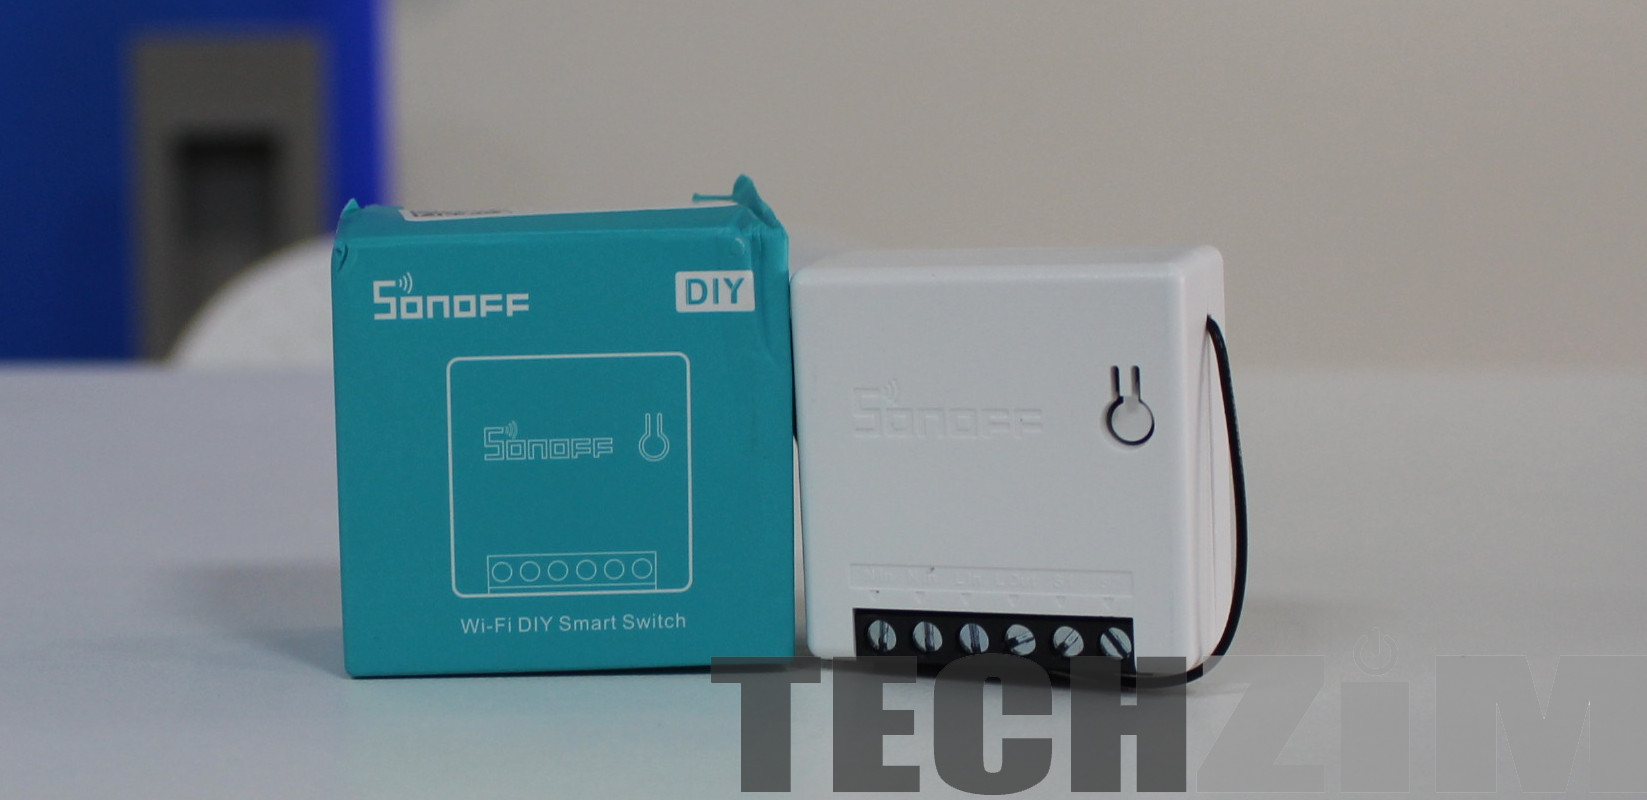 Sonoff smart home switch